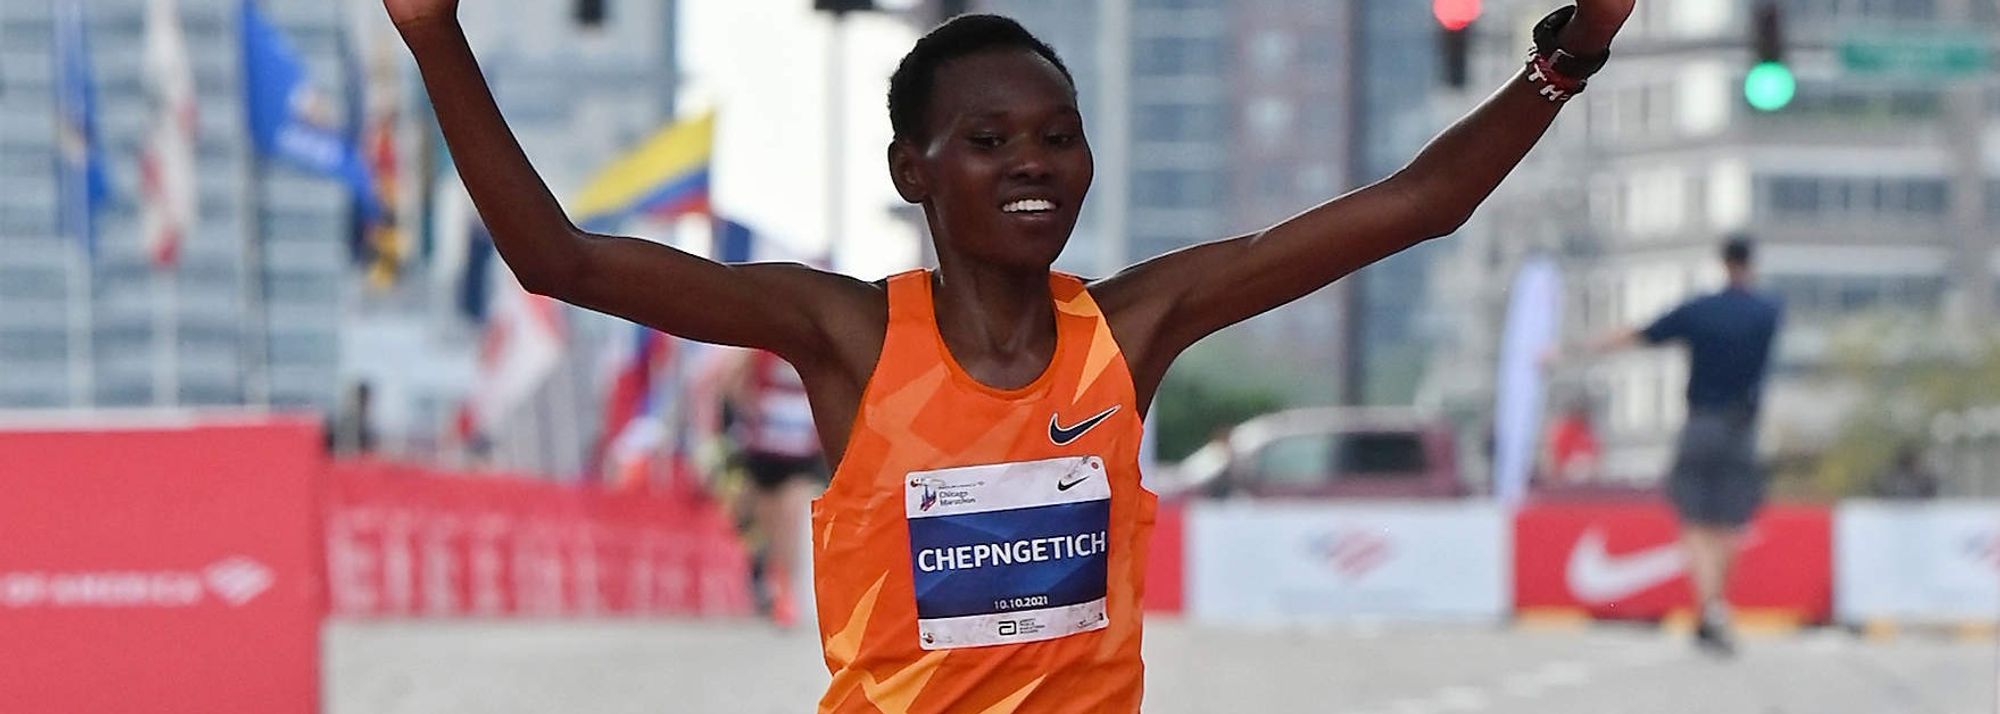 Ruth Chepngetich and Seifu Tura will be at the helm of this year’s Bank of America Chicago Marathon field